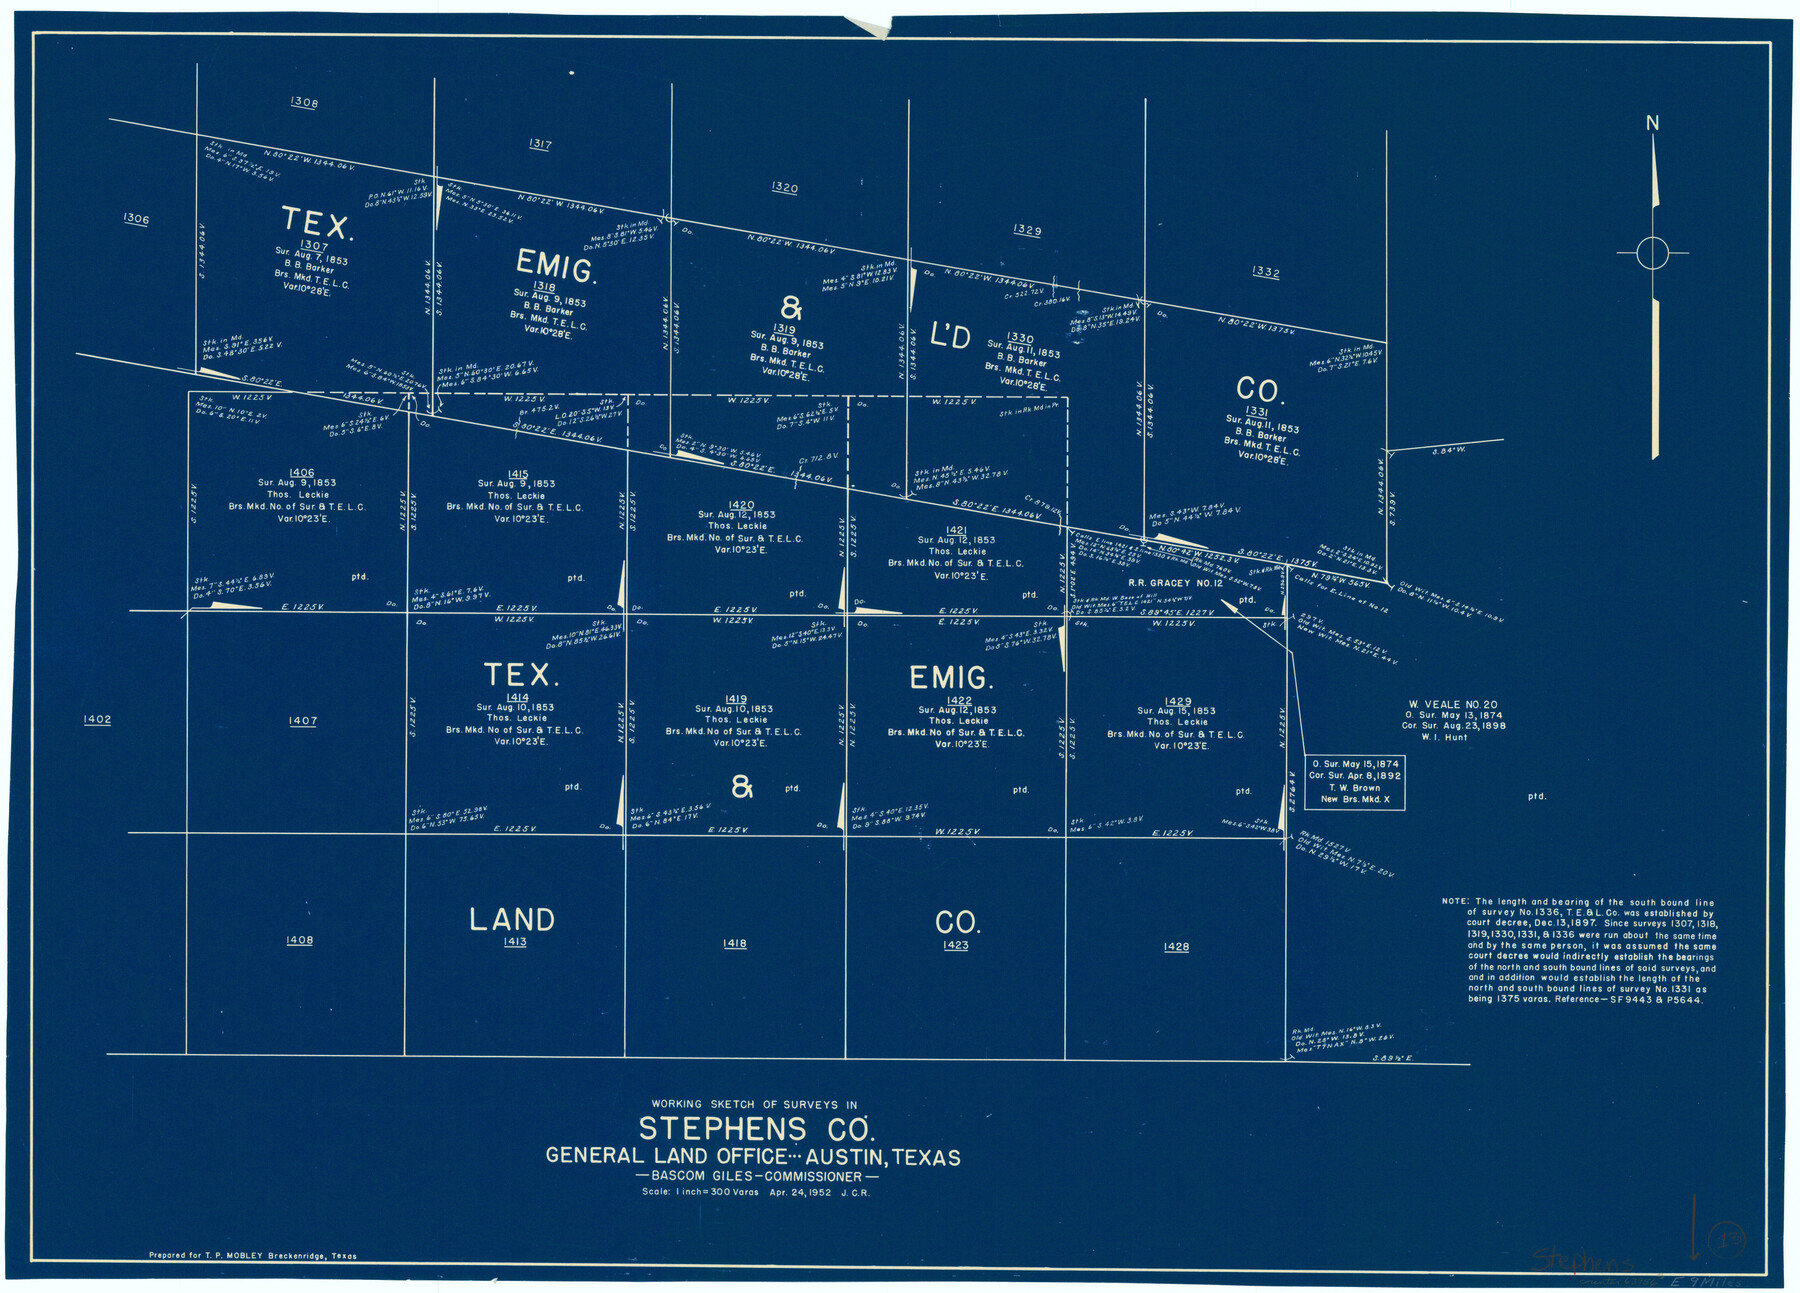 63956, Stephens County Working Sketch 13, General Map Collection